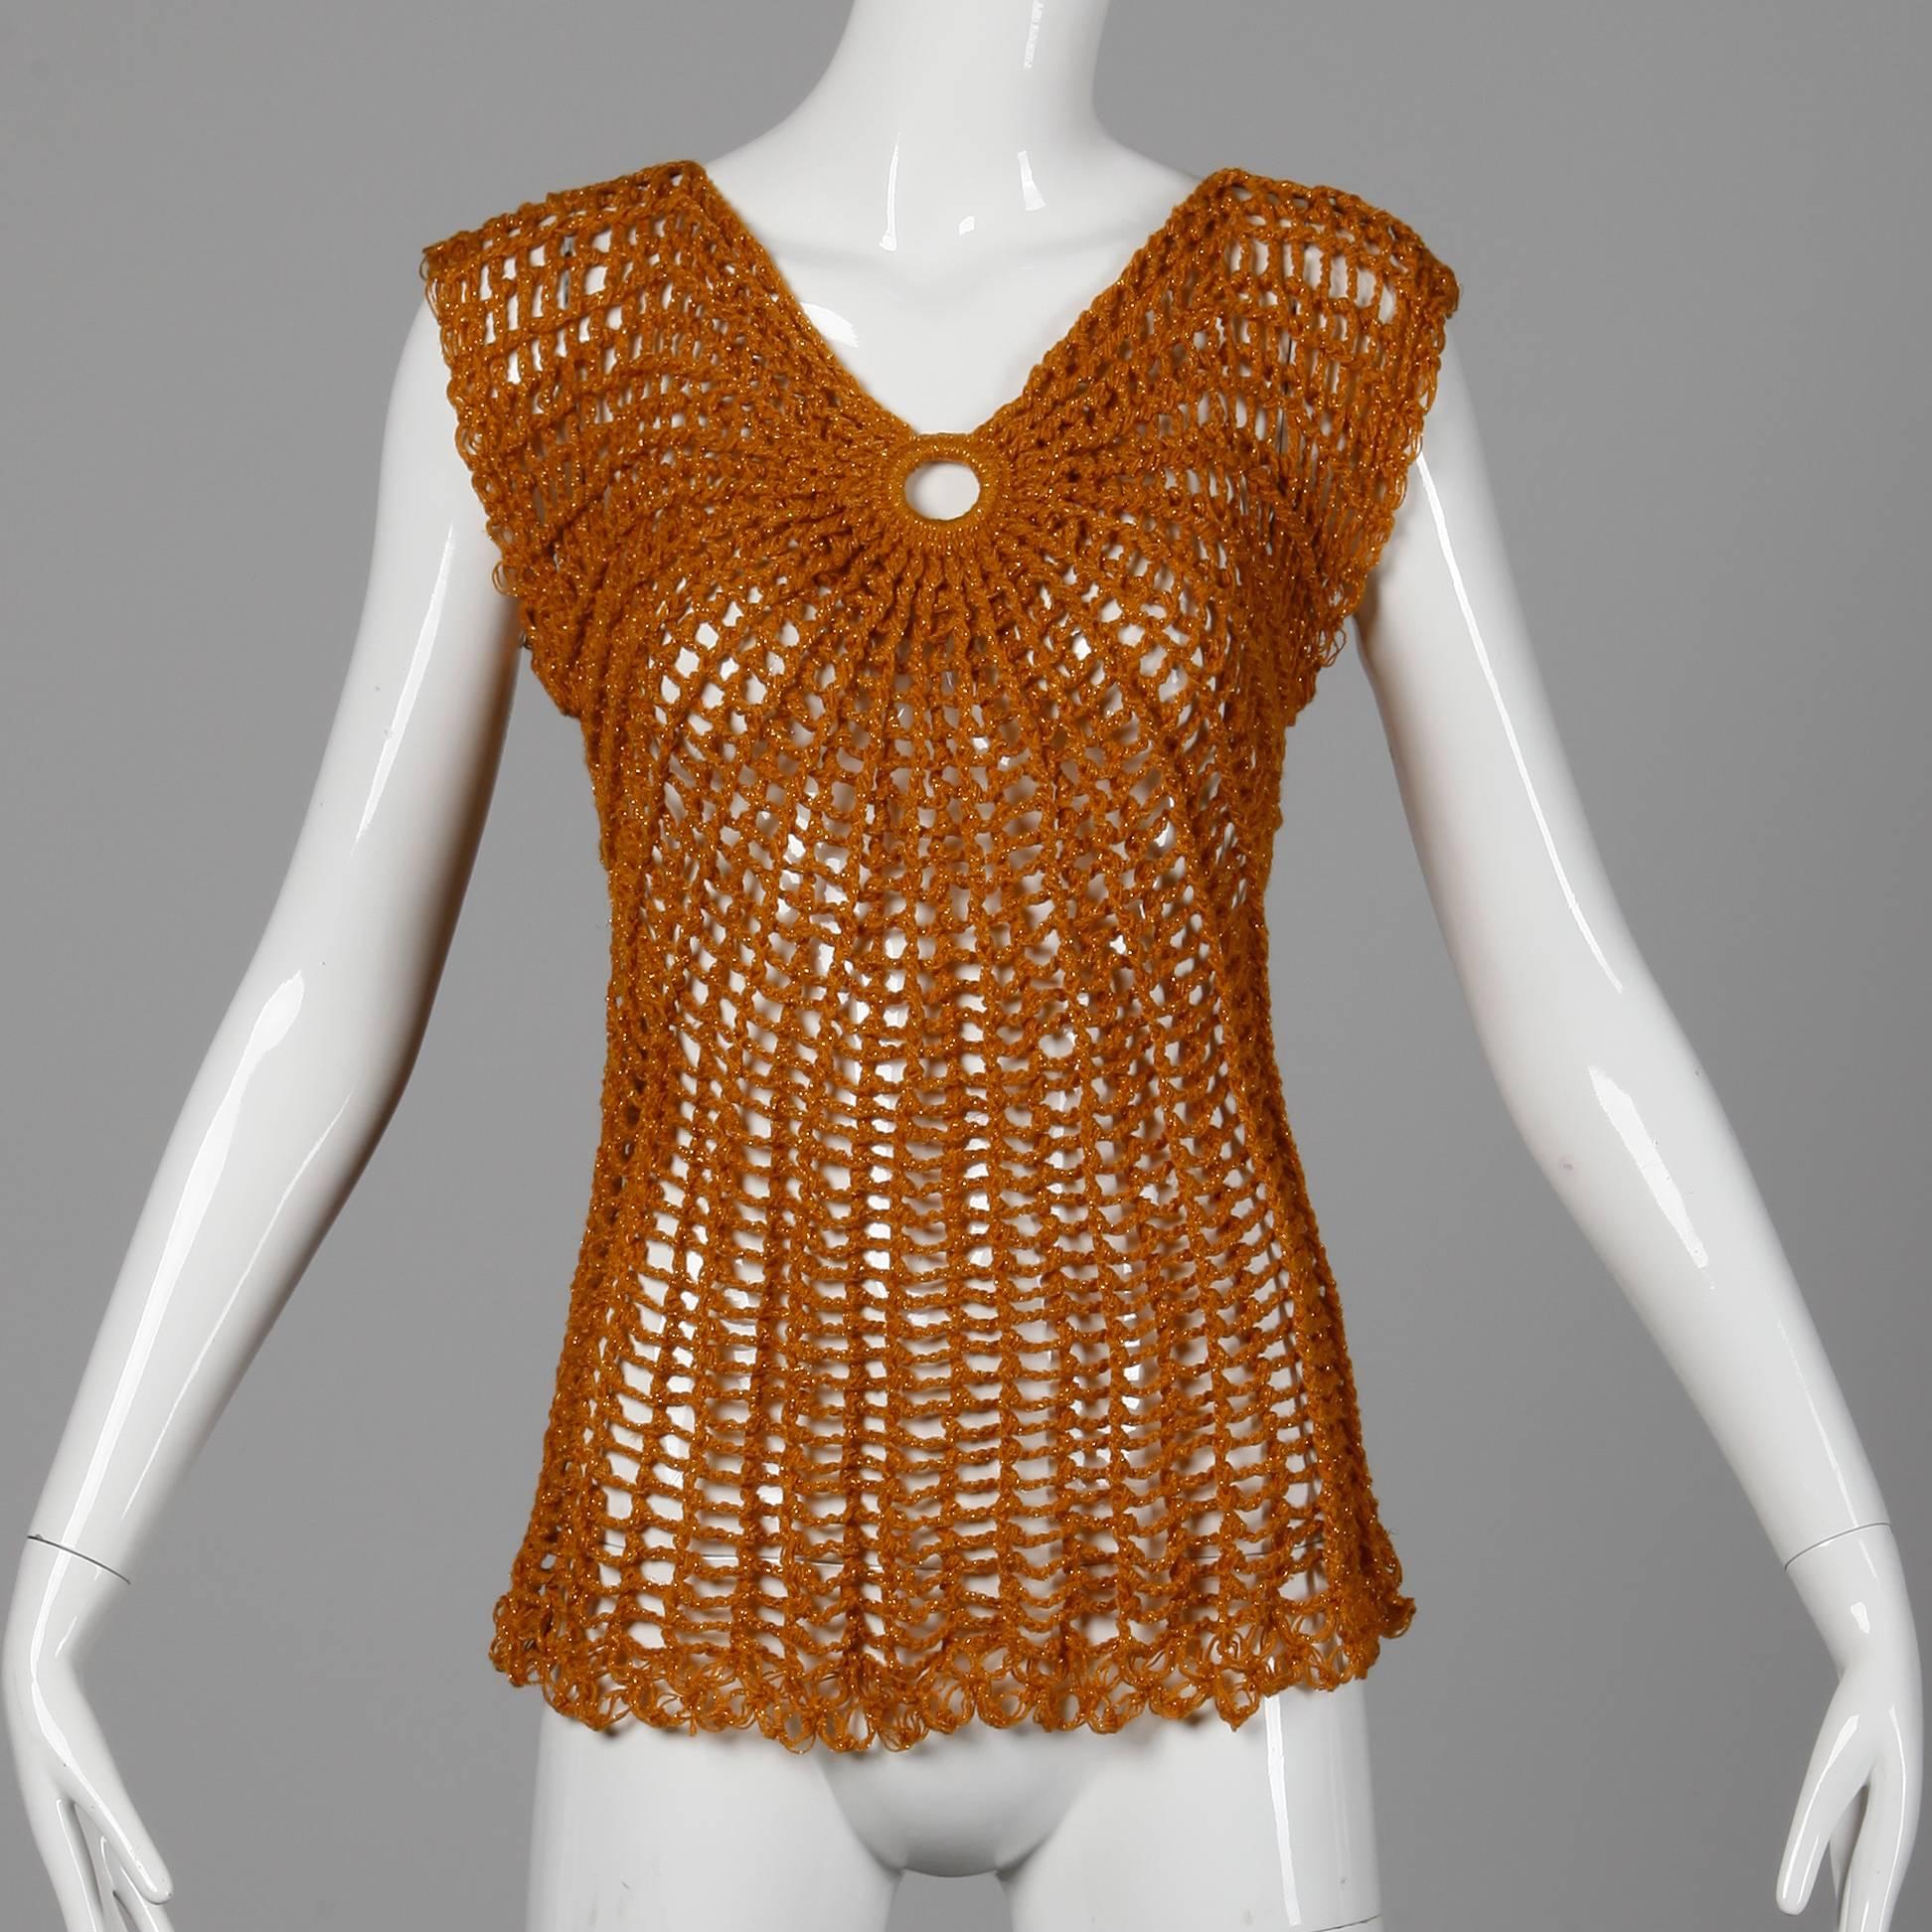 Hand done! This vintage metallic gold crochet sweater top is from the 1970s. Unlined with no closure (pulls on over the head). Fits like a modern size small-medium. The bust measures 30-38